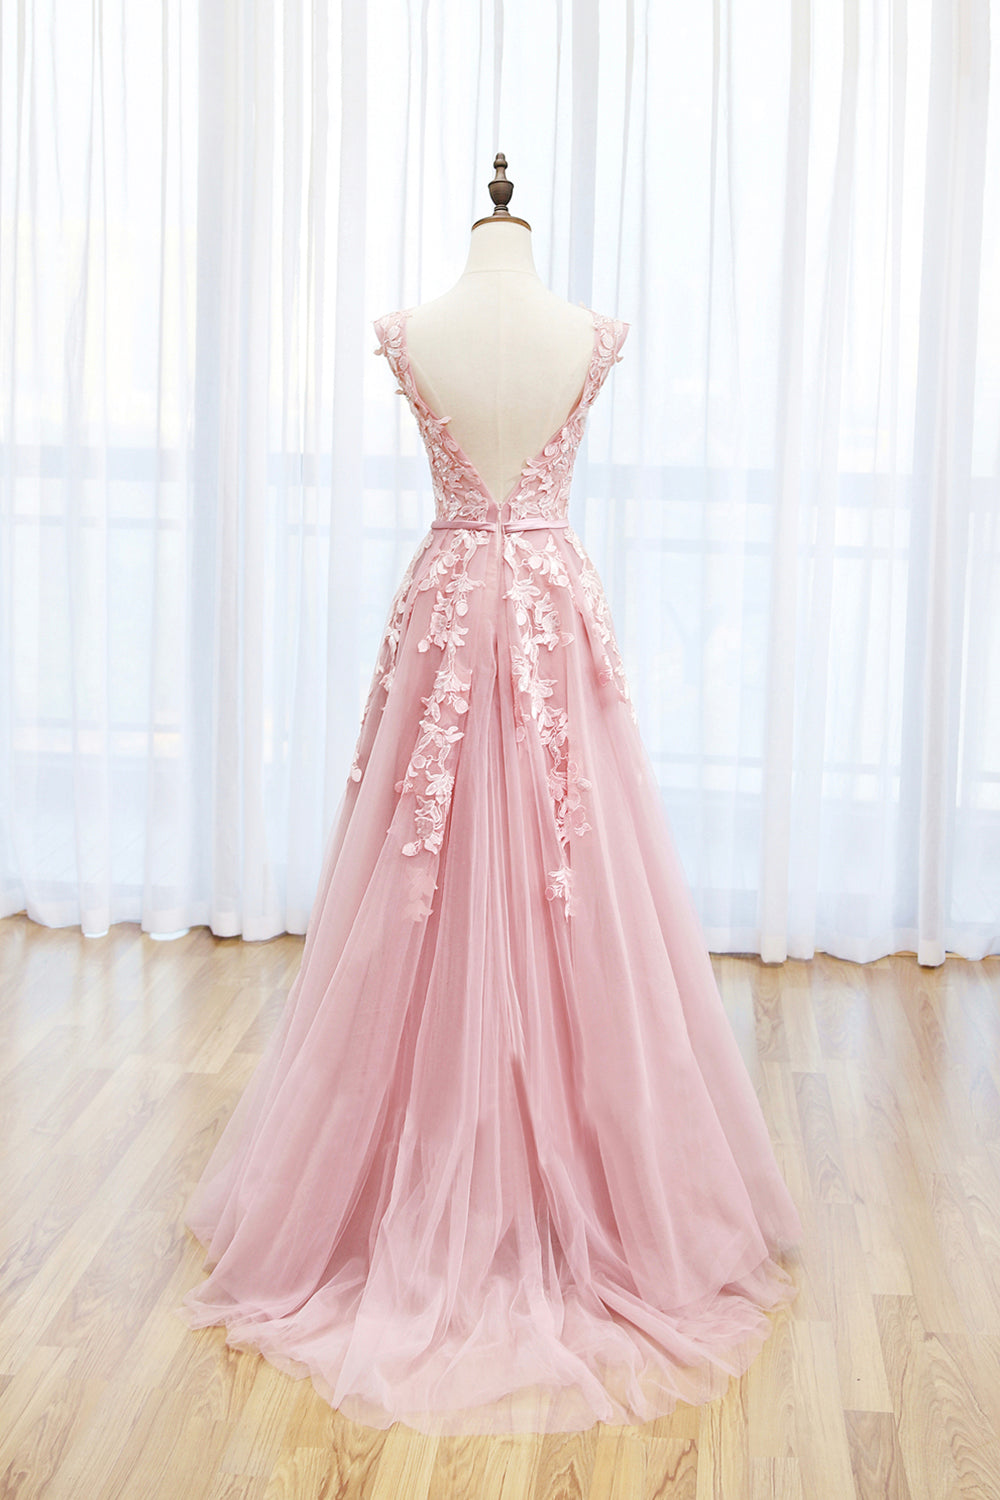 Irene | Pink Tulle Lace Long Prom Dress, Lovely A-Line Open Back Evening Dress